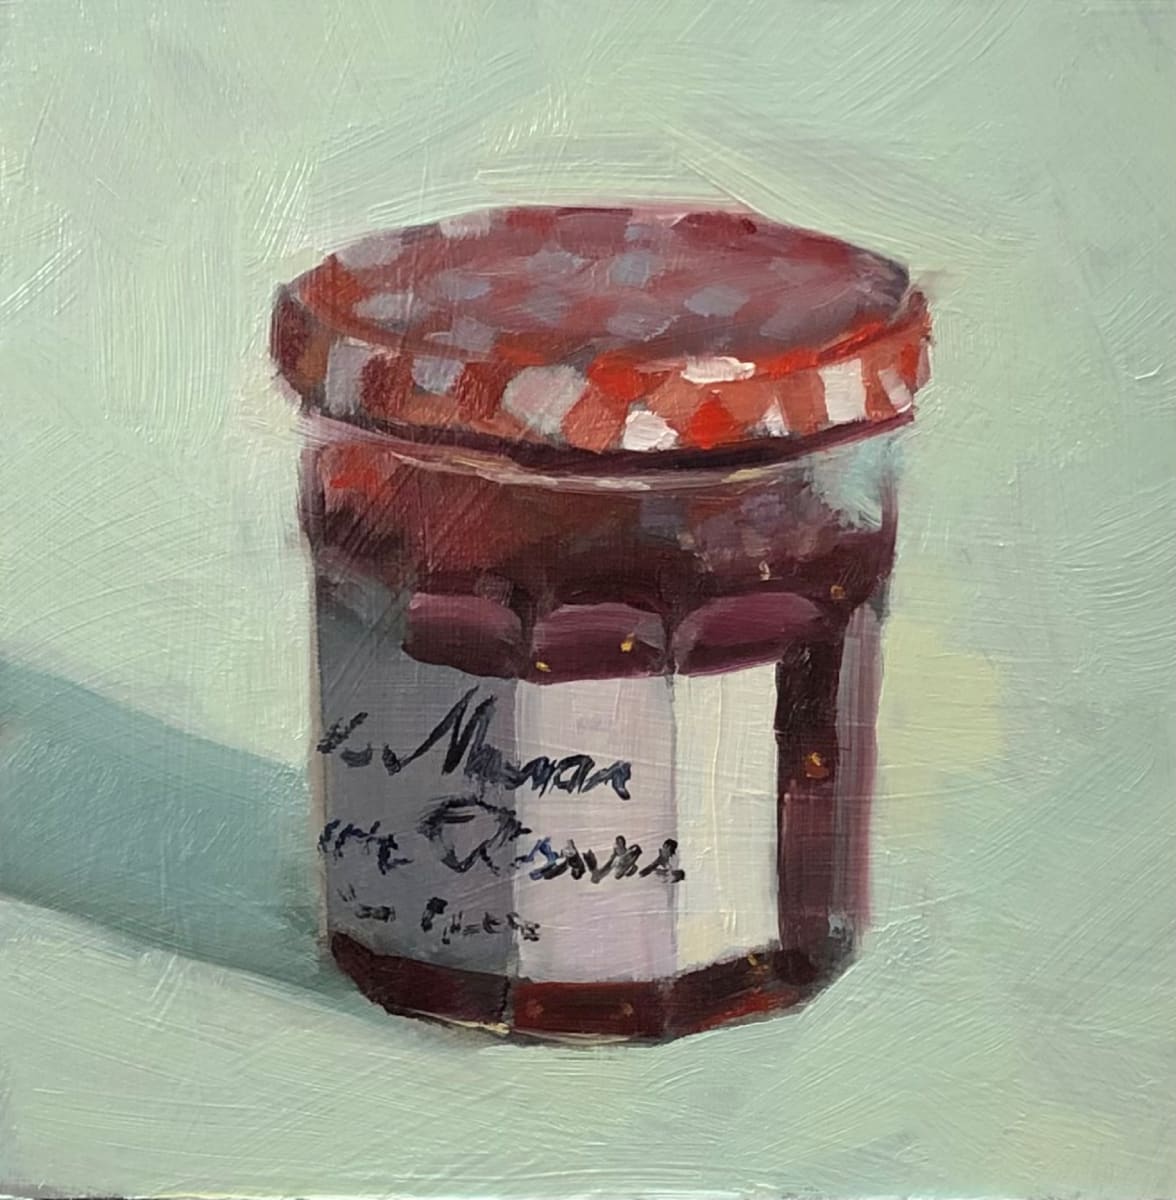 Bonne Maman by Cary Galbraith  Image: The name is French for "Granny". A french company where every offering is designed to delight. Simple ingredients that taste like homemade. Here we have Raspberry Preserves, a real favorite of mine.  